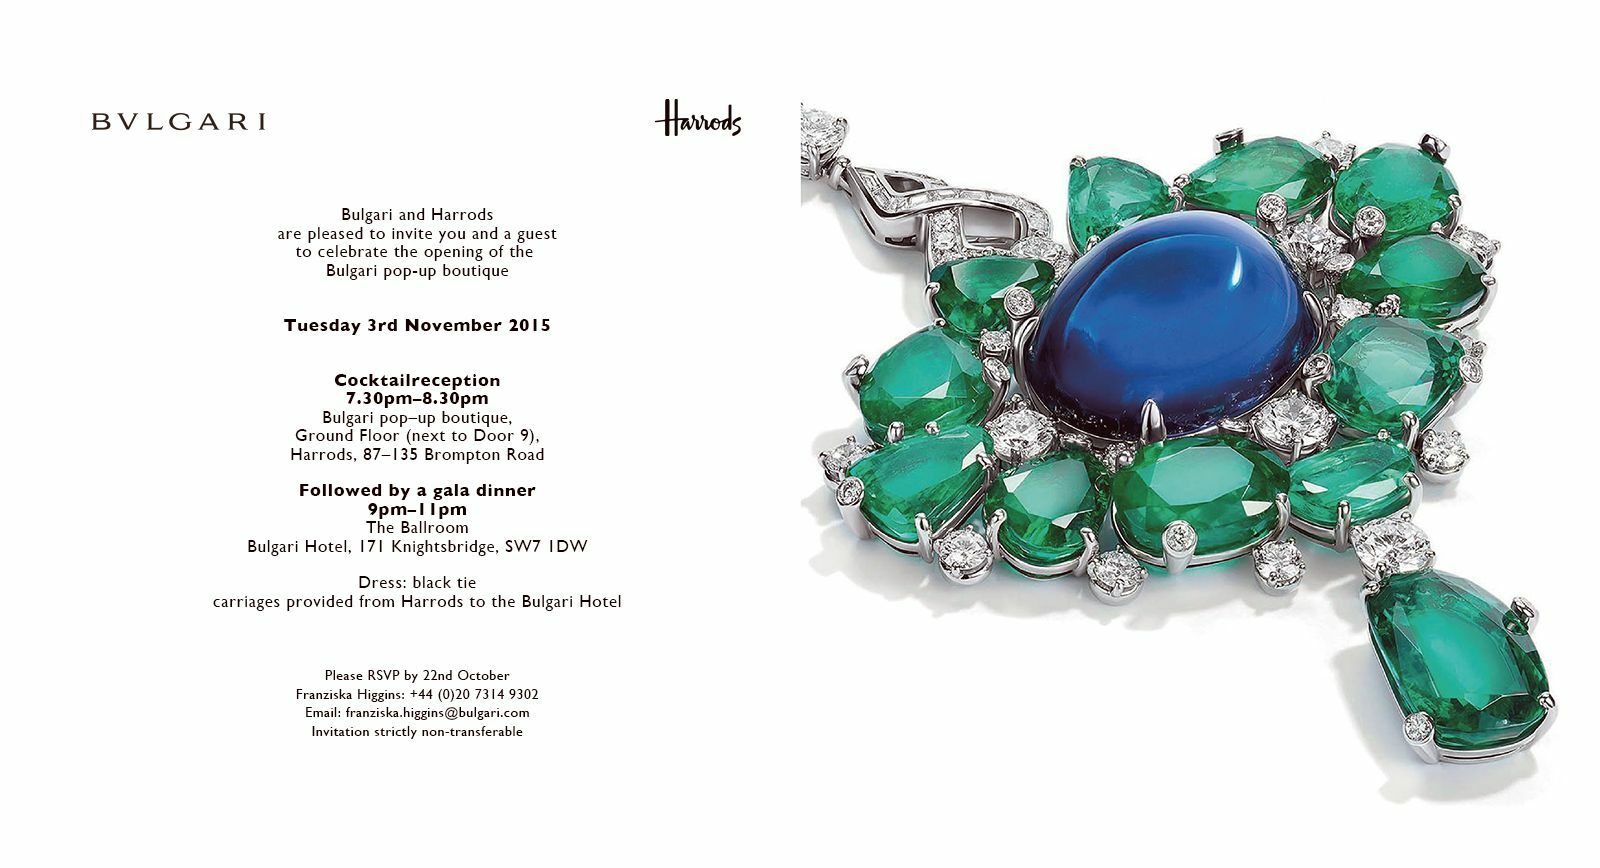 Discover Exclusive Bulgari Pieces at the Pop-Up Salon in Harrods